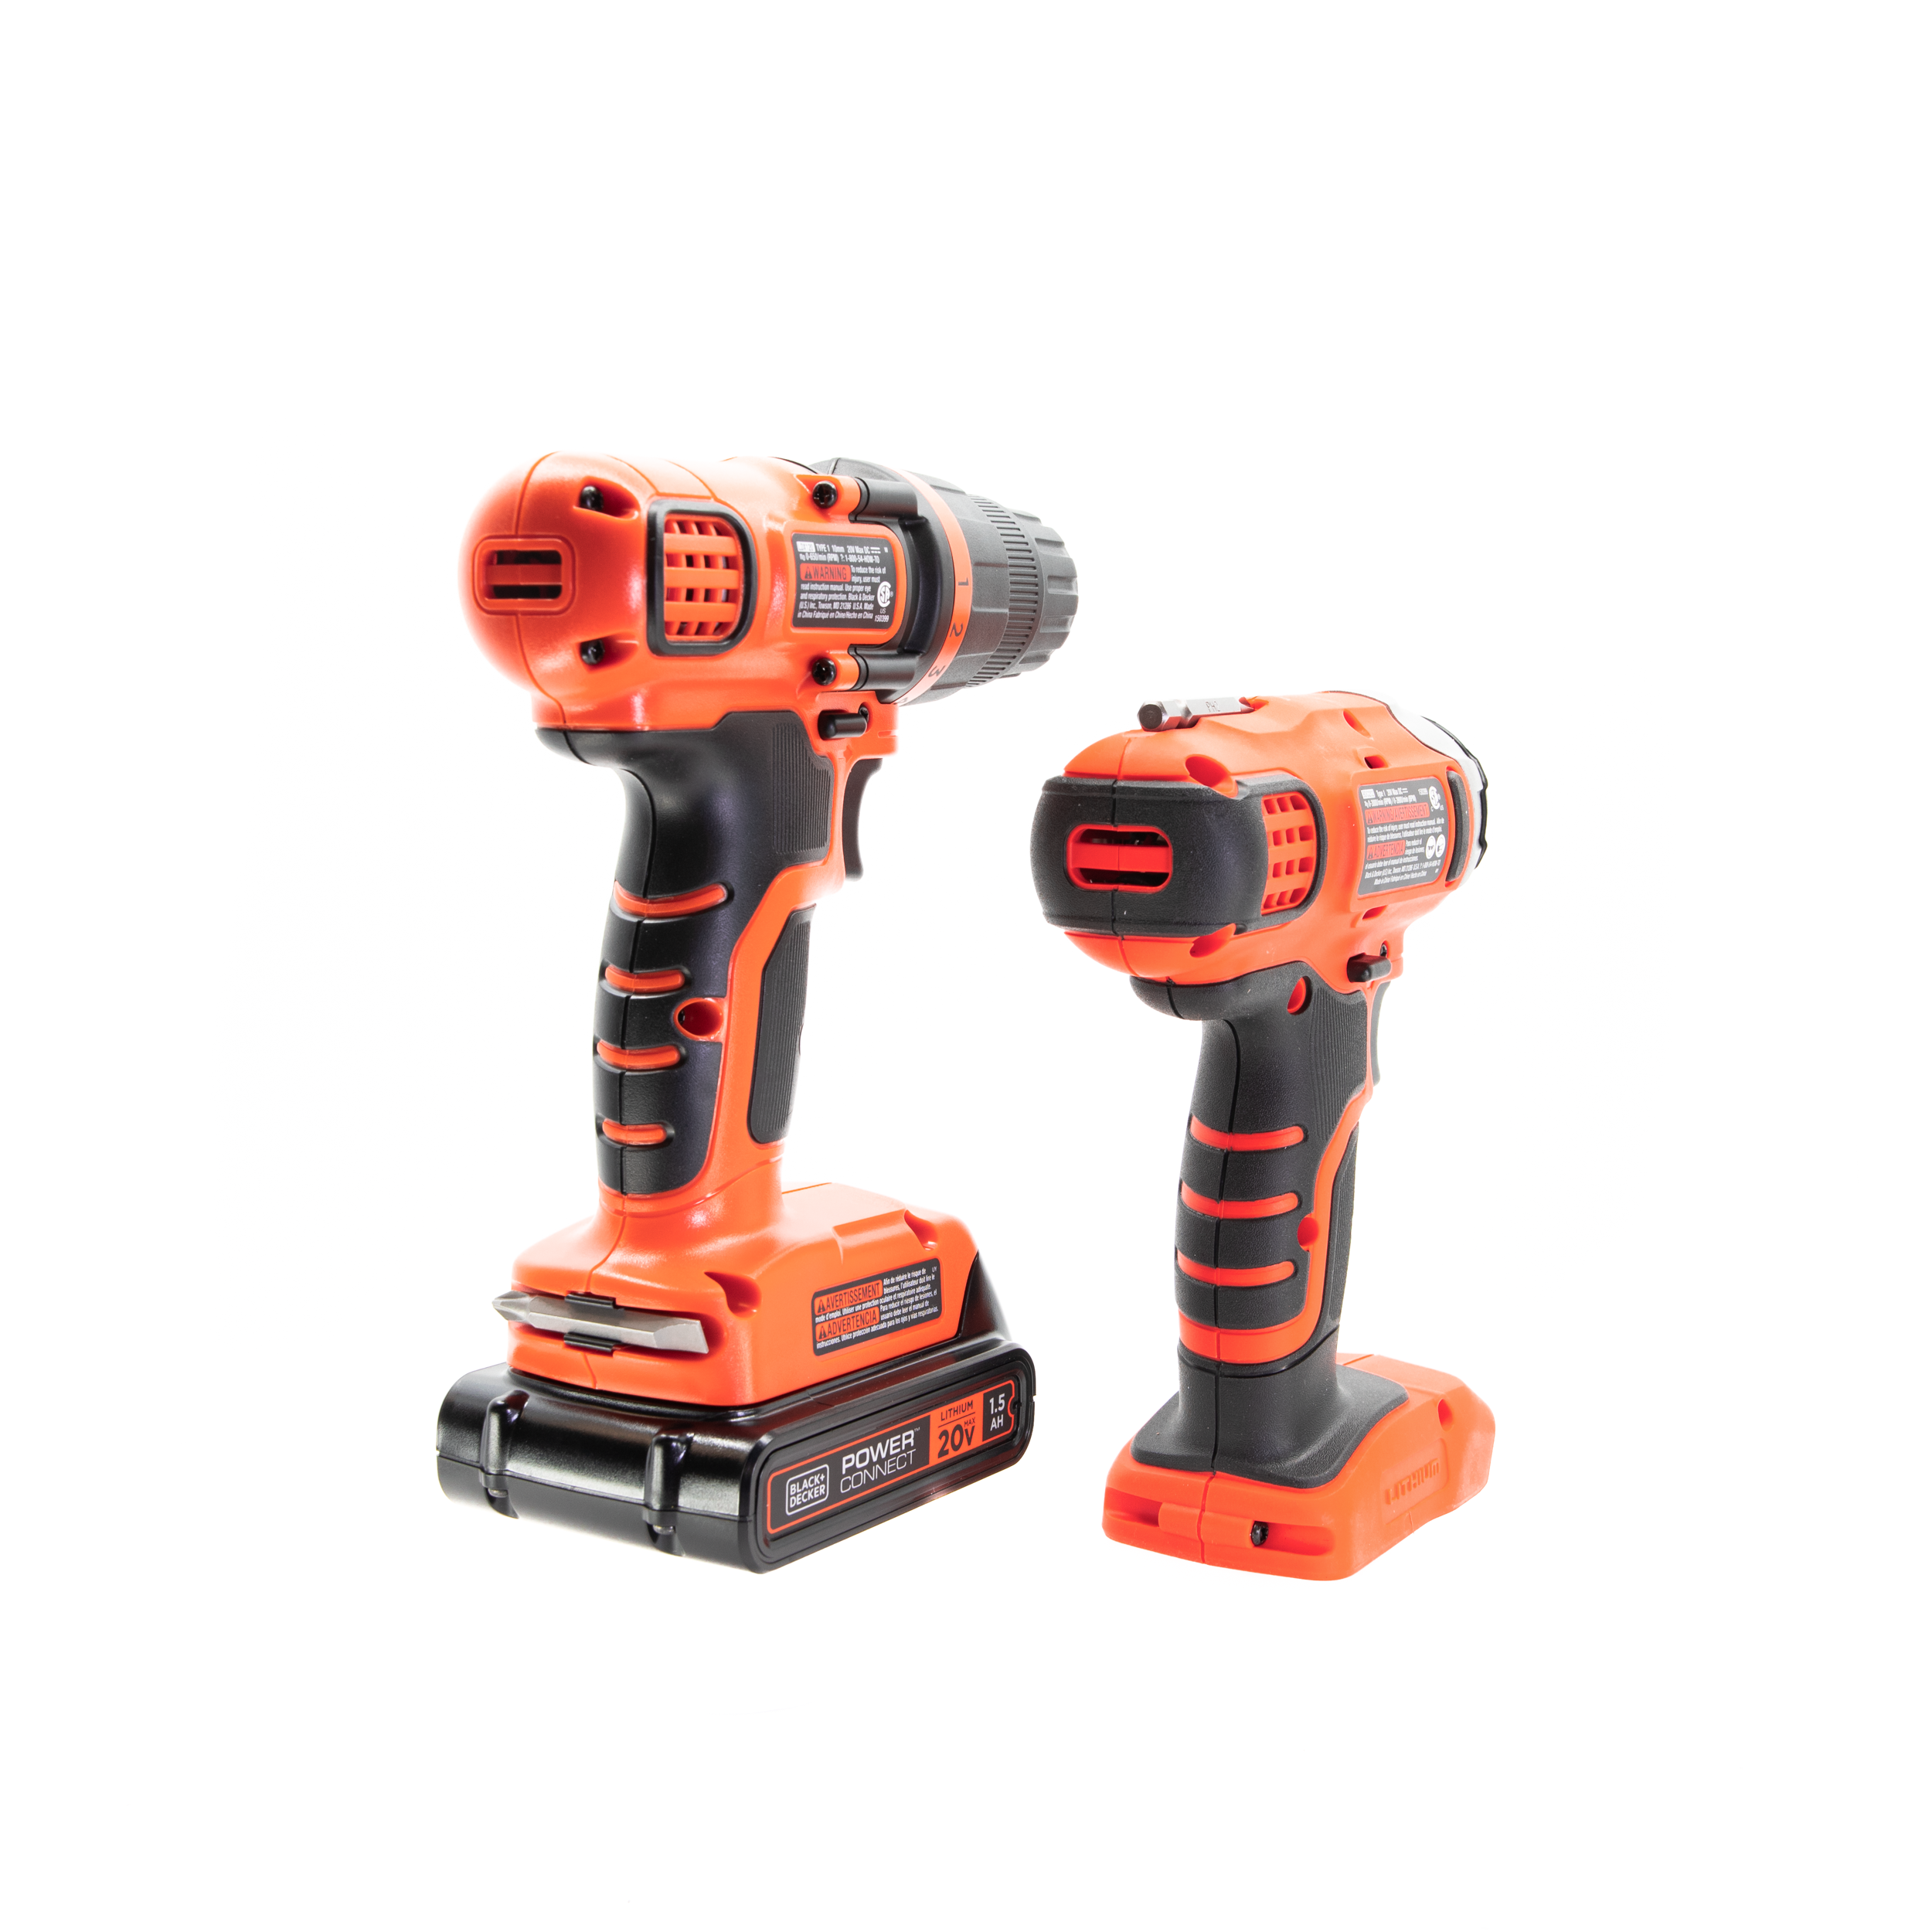 BLACK+DECKER 20V MAX Cordless Drill and Impact Driver, Power Tool Combo Kit  with Battery and Charger (BD2KITCDDI) 20V MAX* Drill/Driver and Impact  Combo Kit 